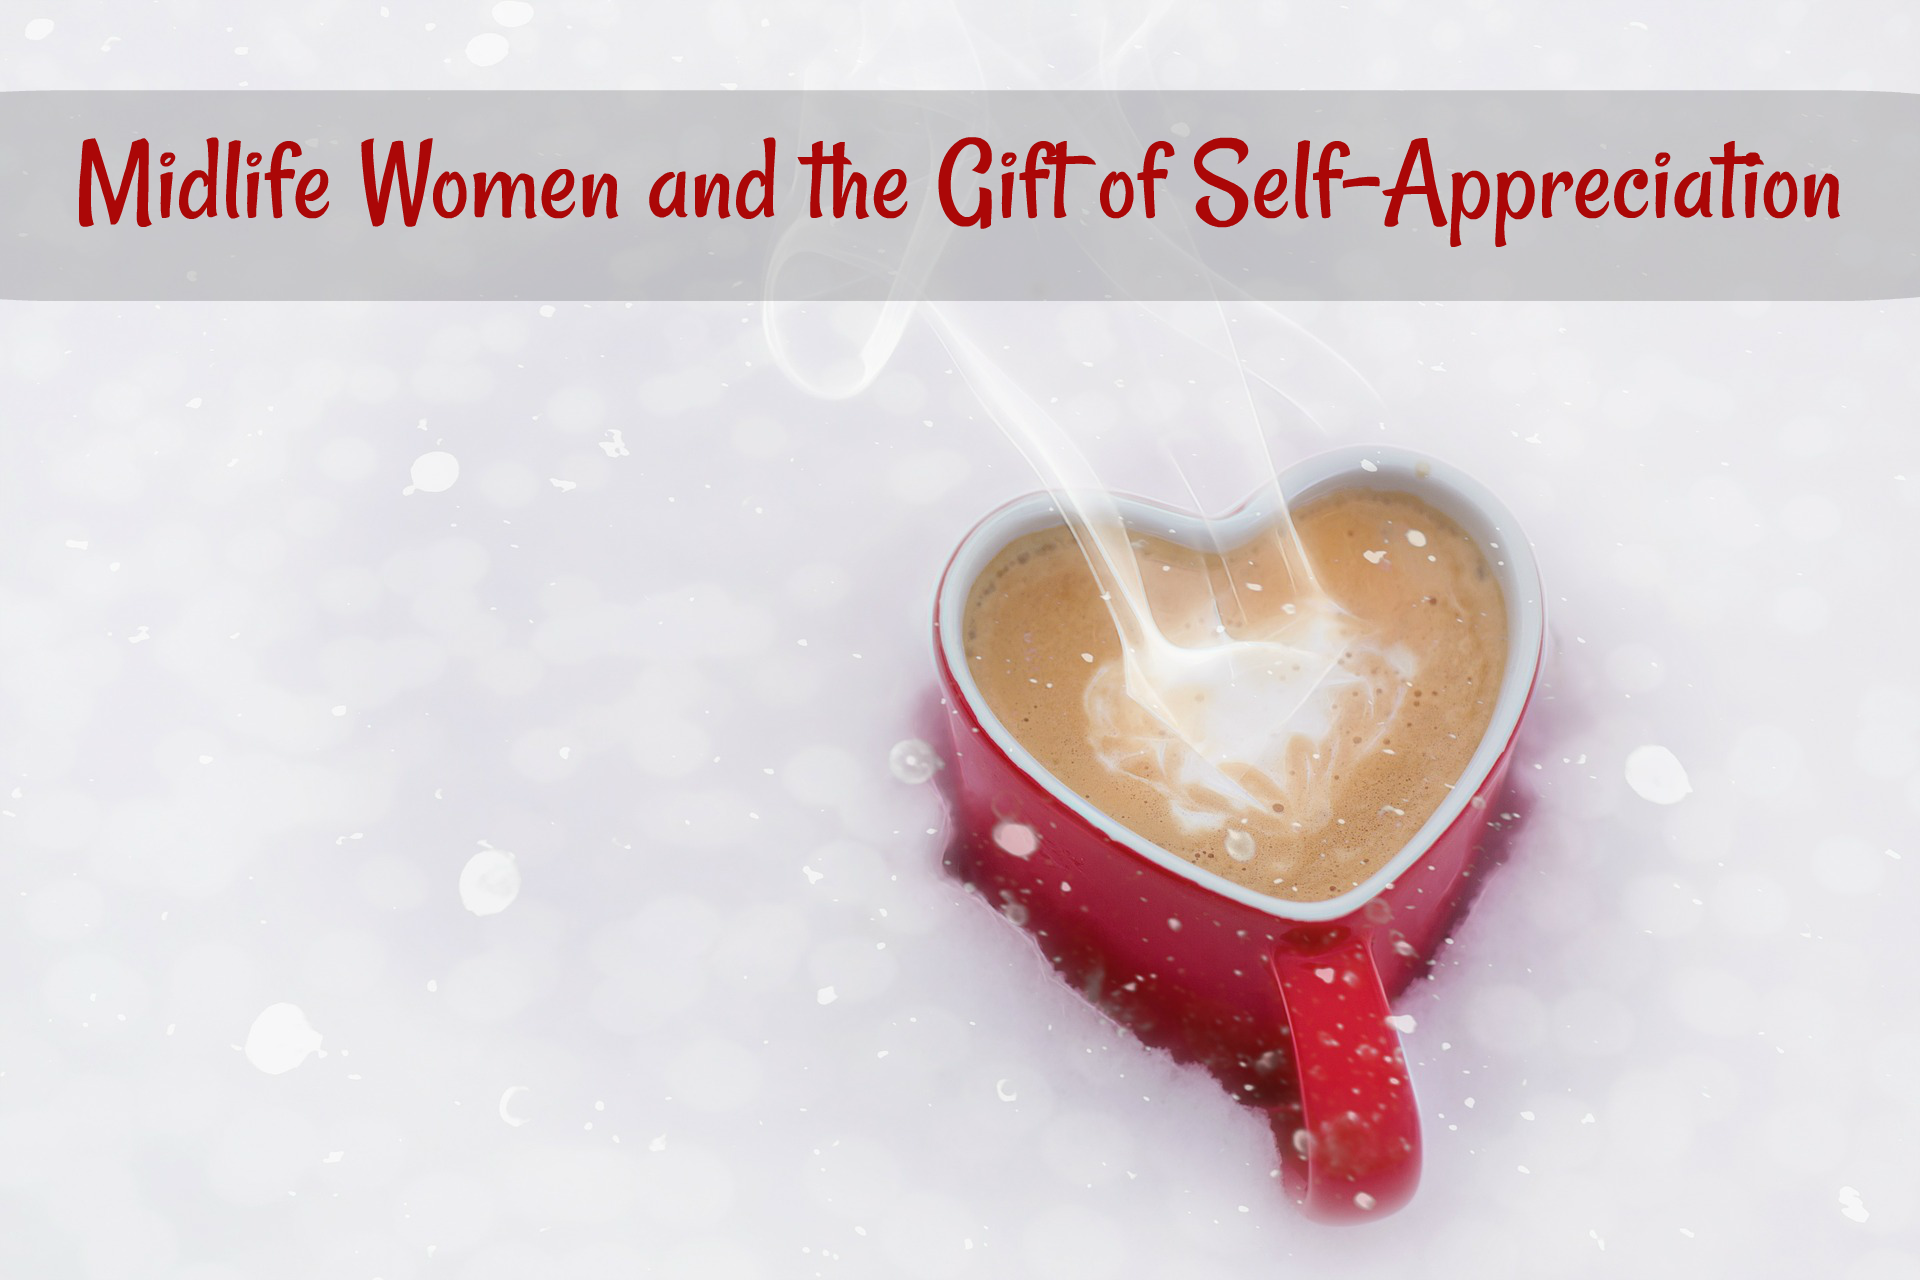 Midlife Women and the Gift of Self-Appreciation